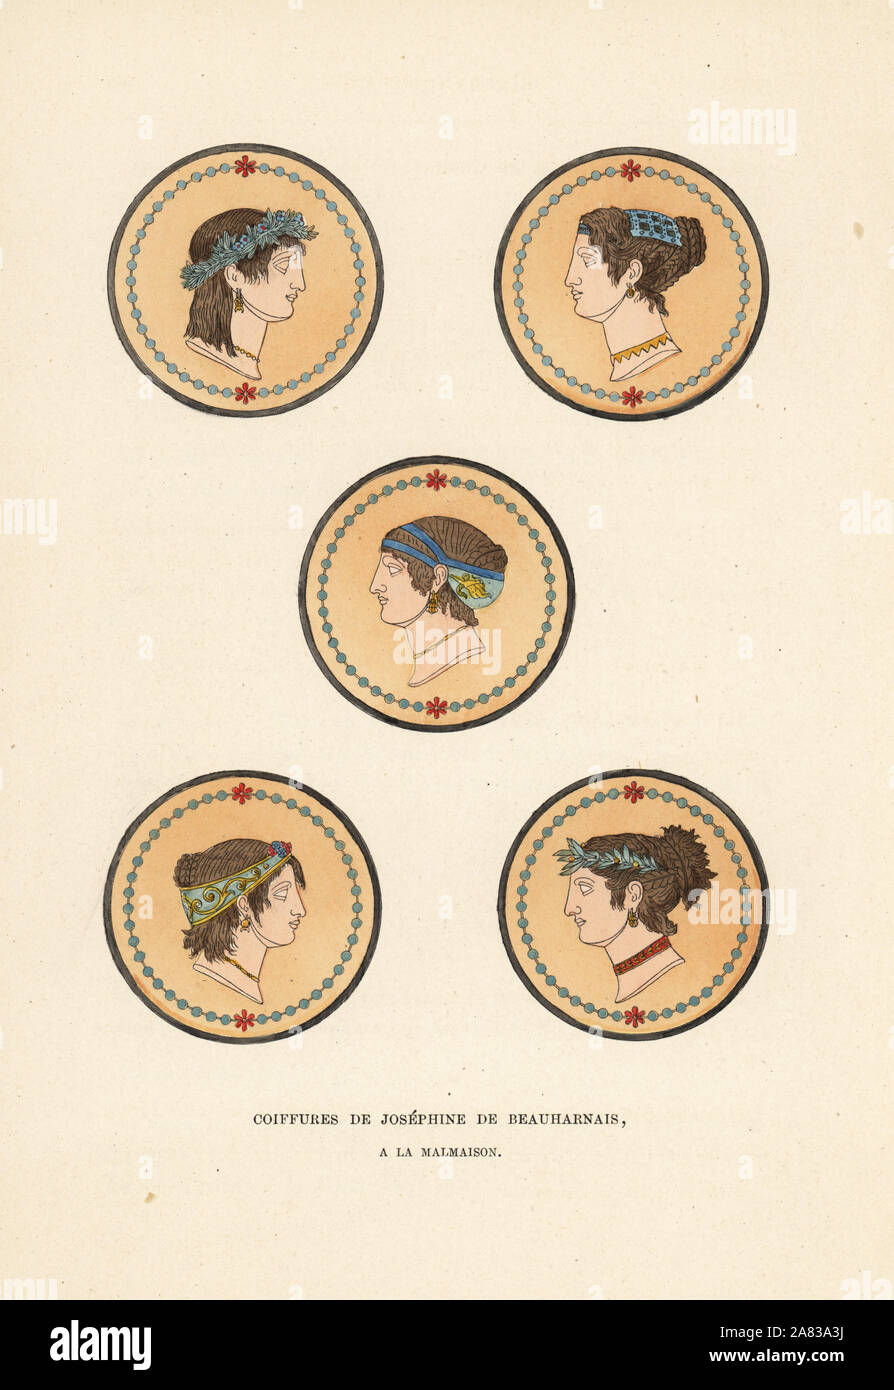 Hairstyles of Josephine de Beauharnais, 1788, later wife to Napoleon, from murals in the bathrooms at Malmaison in the Roman style. Handcoloured lithograph from Fashions and Customs of Marie Antoinette and her Times, by Le Comte de Reiset, Paris, 1885. The journal of Madame Eloffe, dressmaker and linen-merchant to the Queen and ladies of the court. Stock Photo